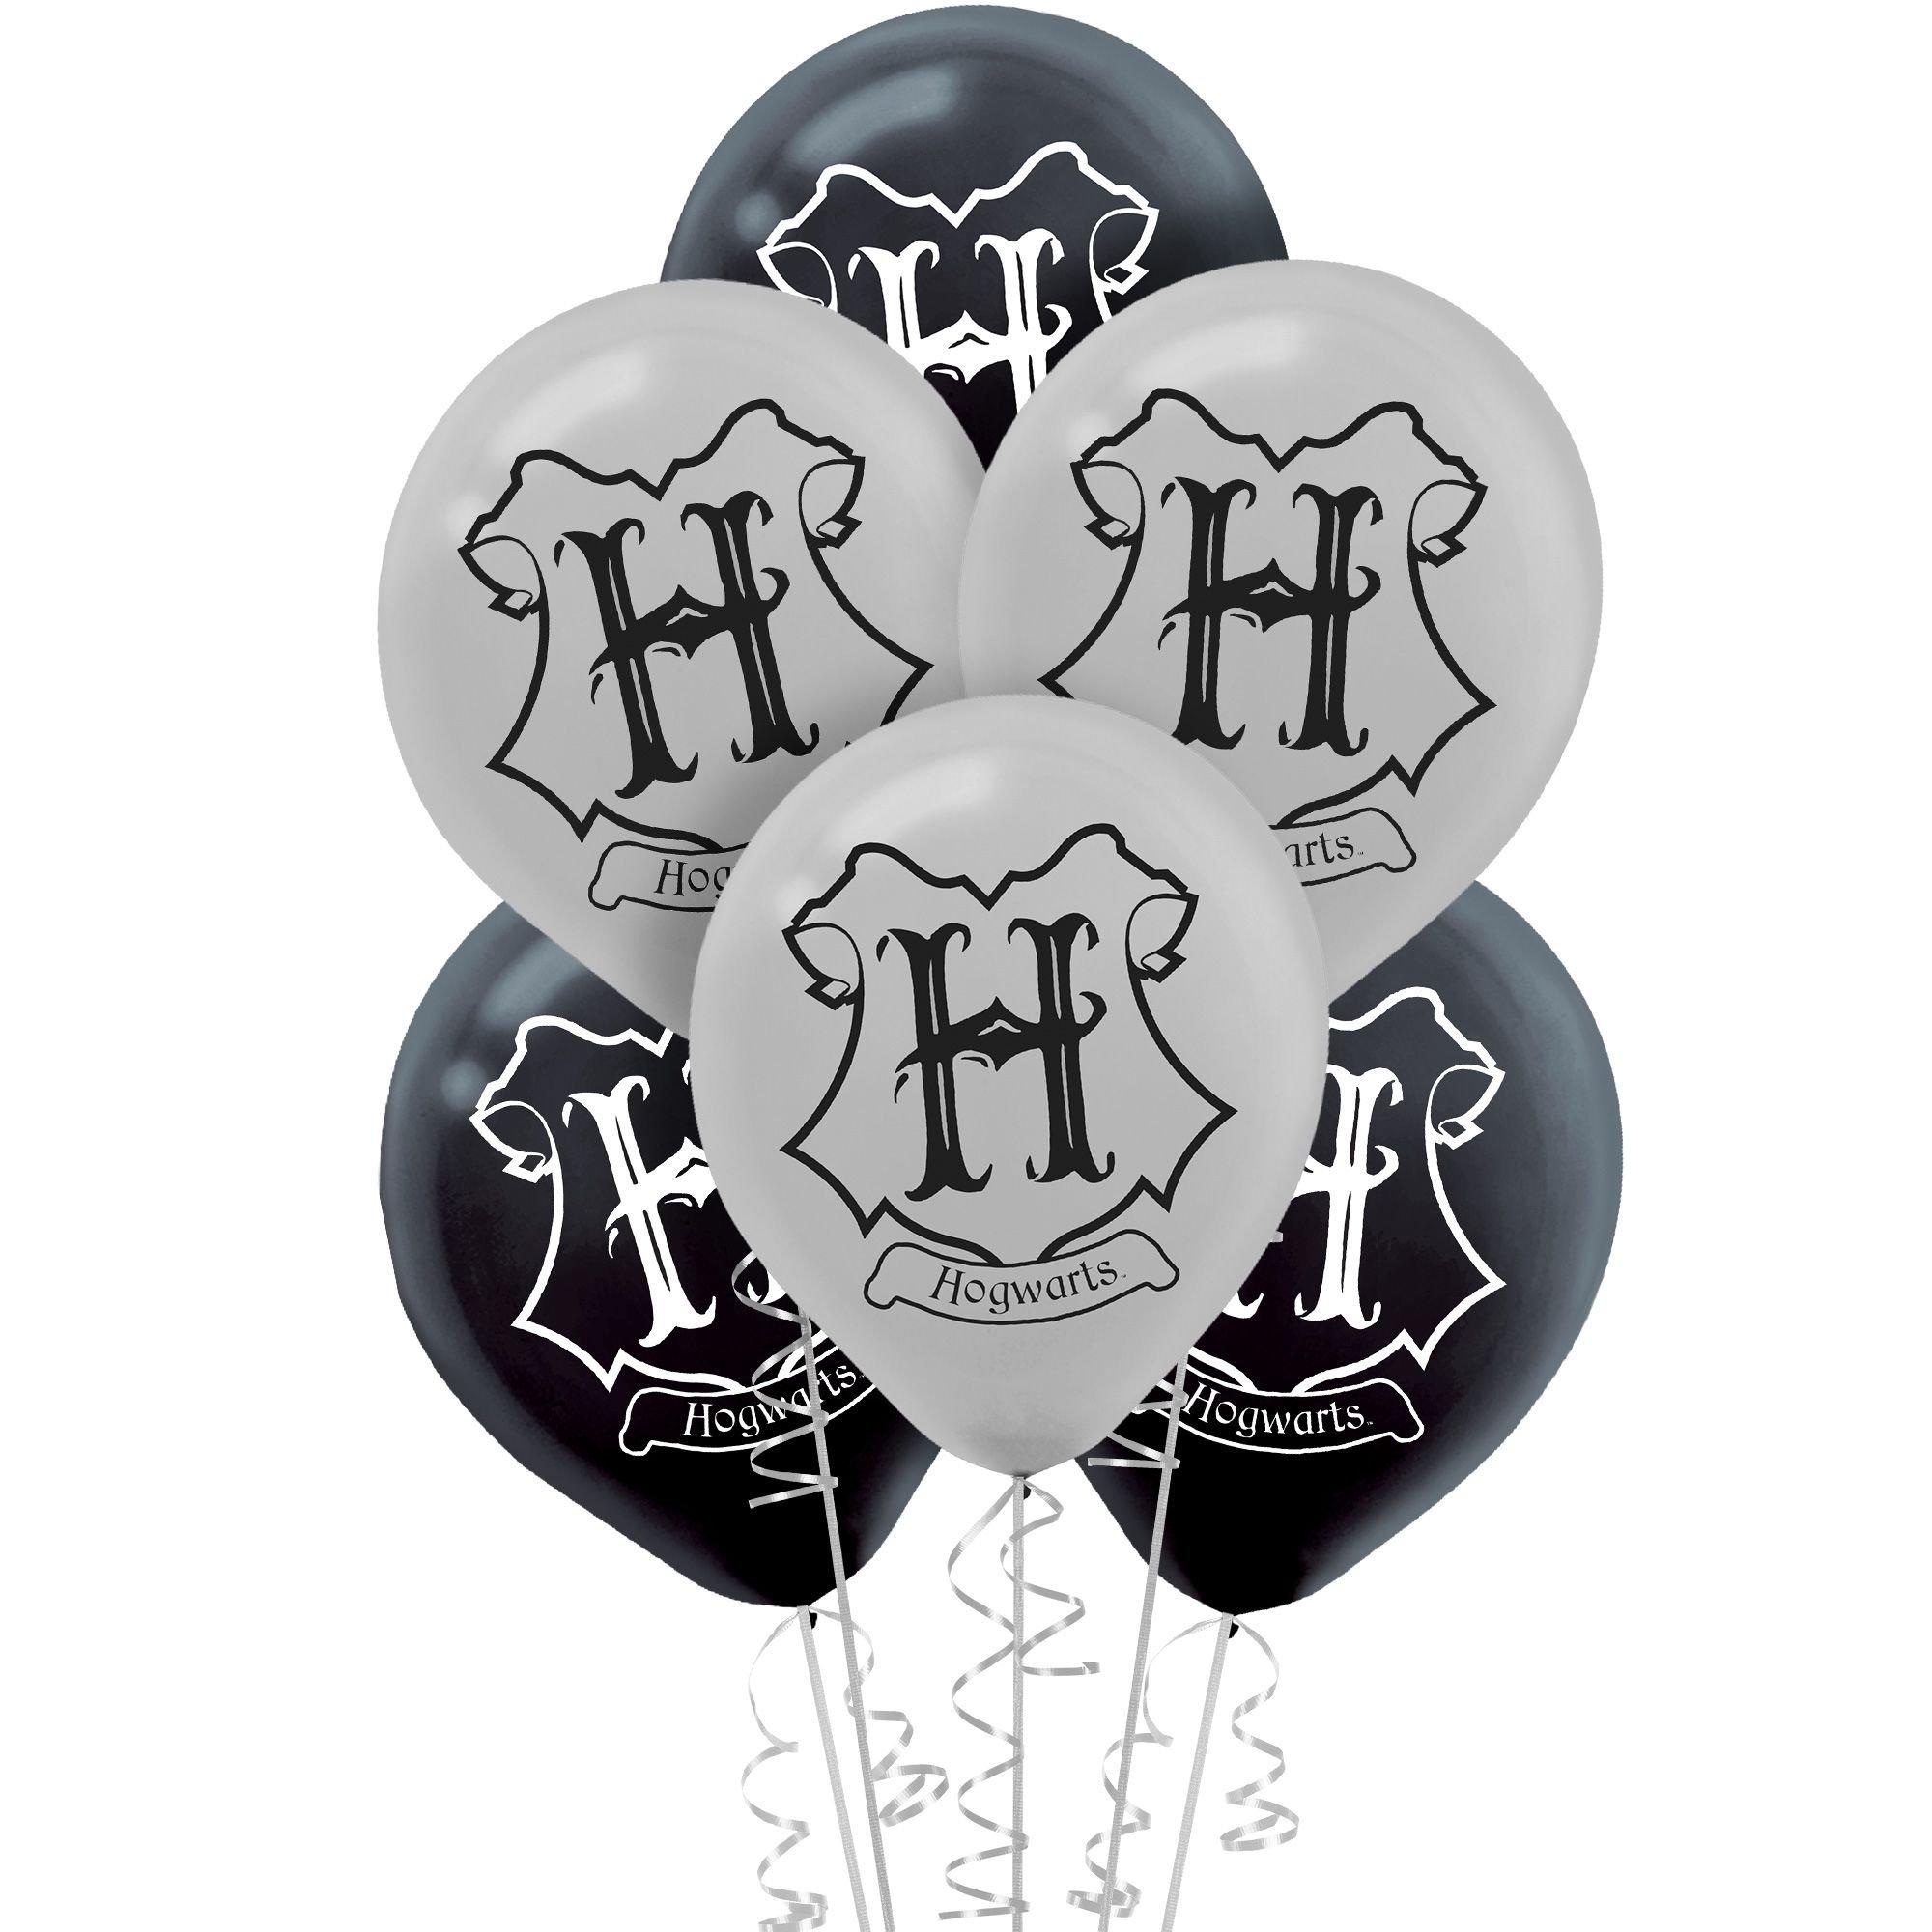 Personalised Harry Potter balloon display